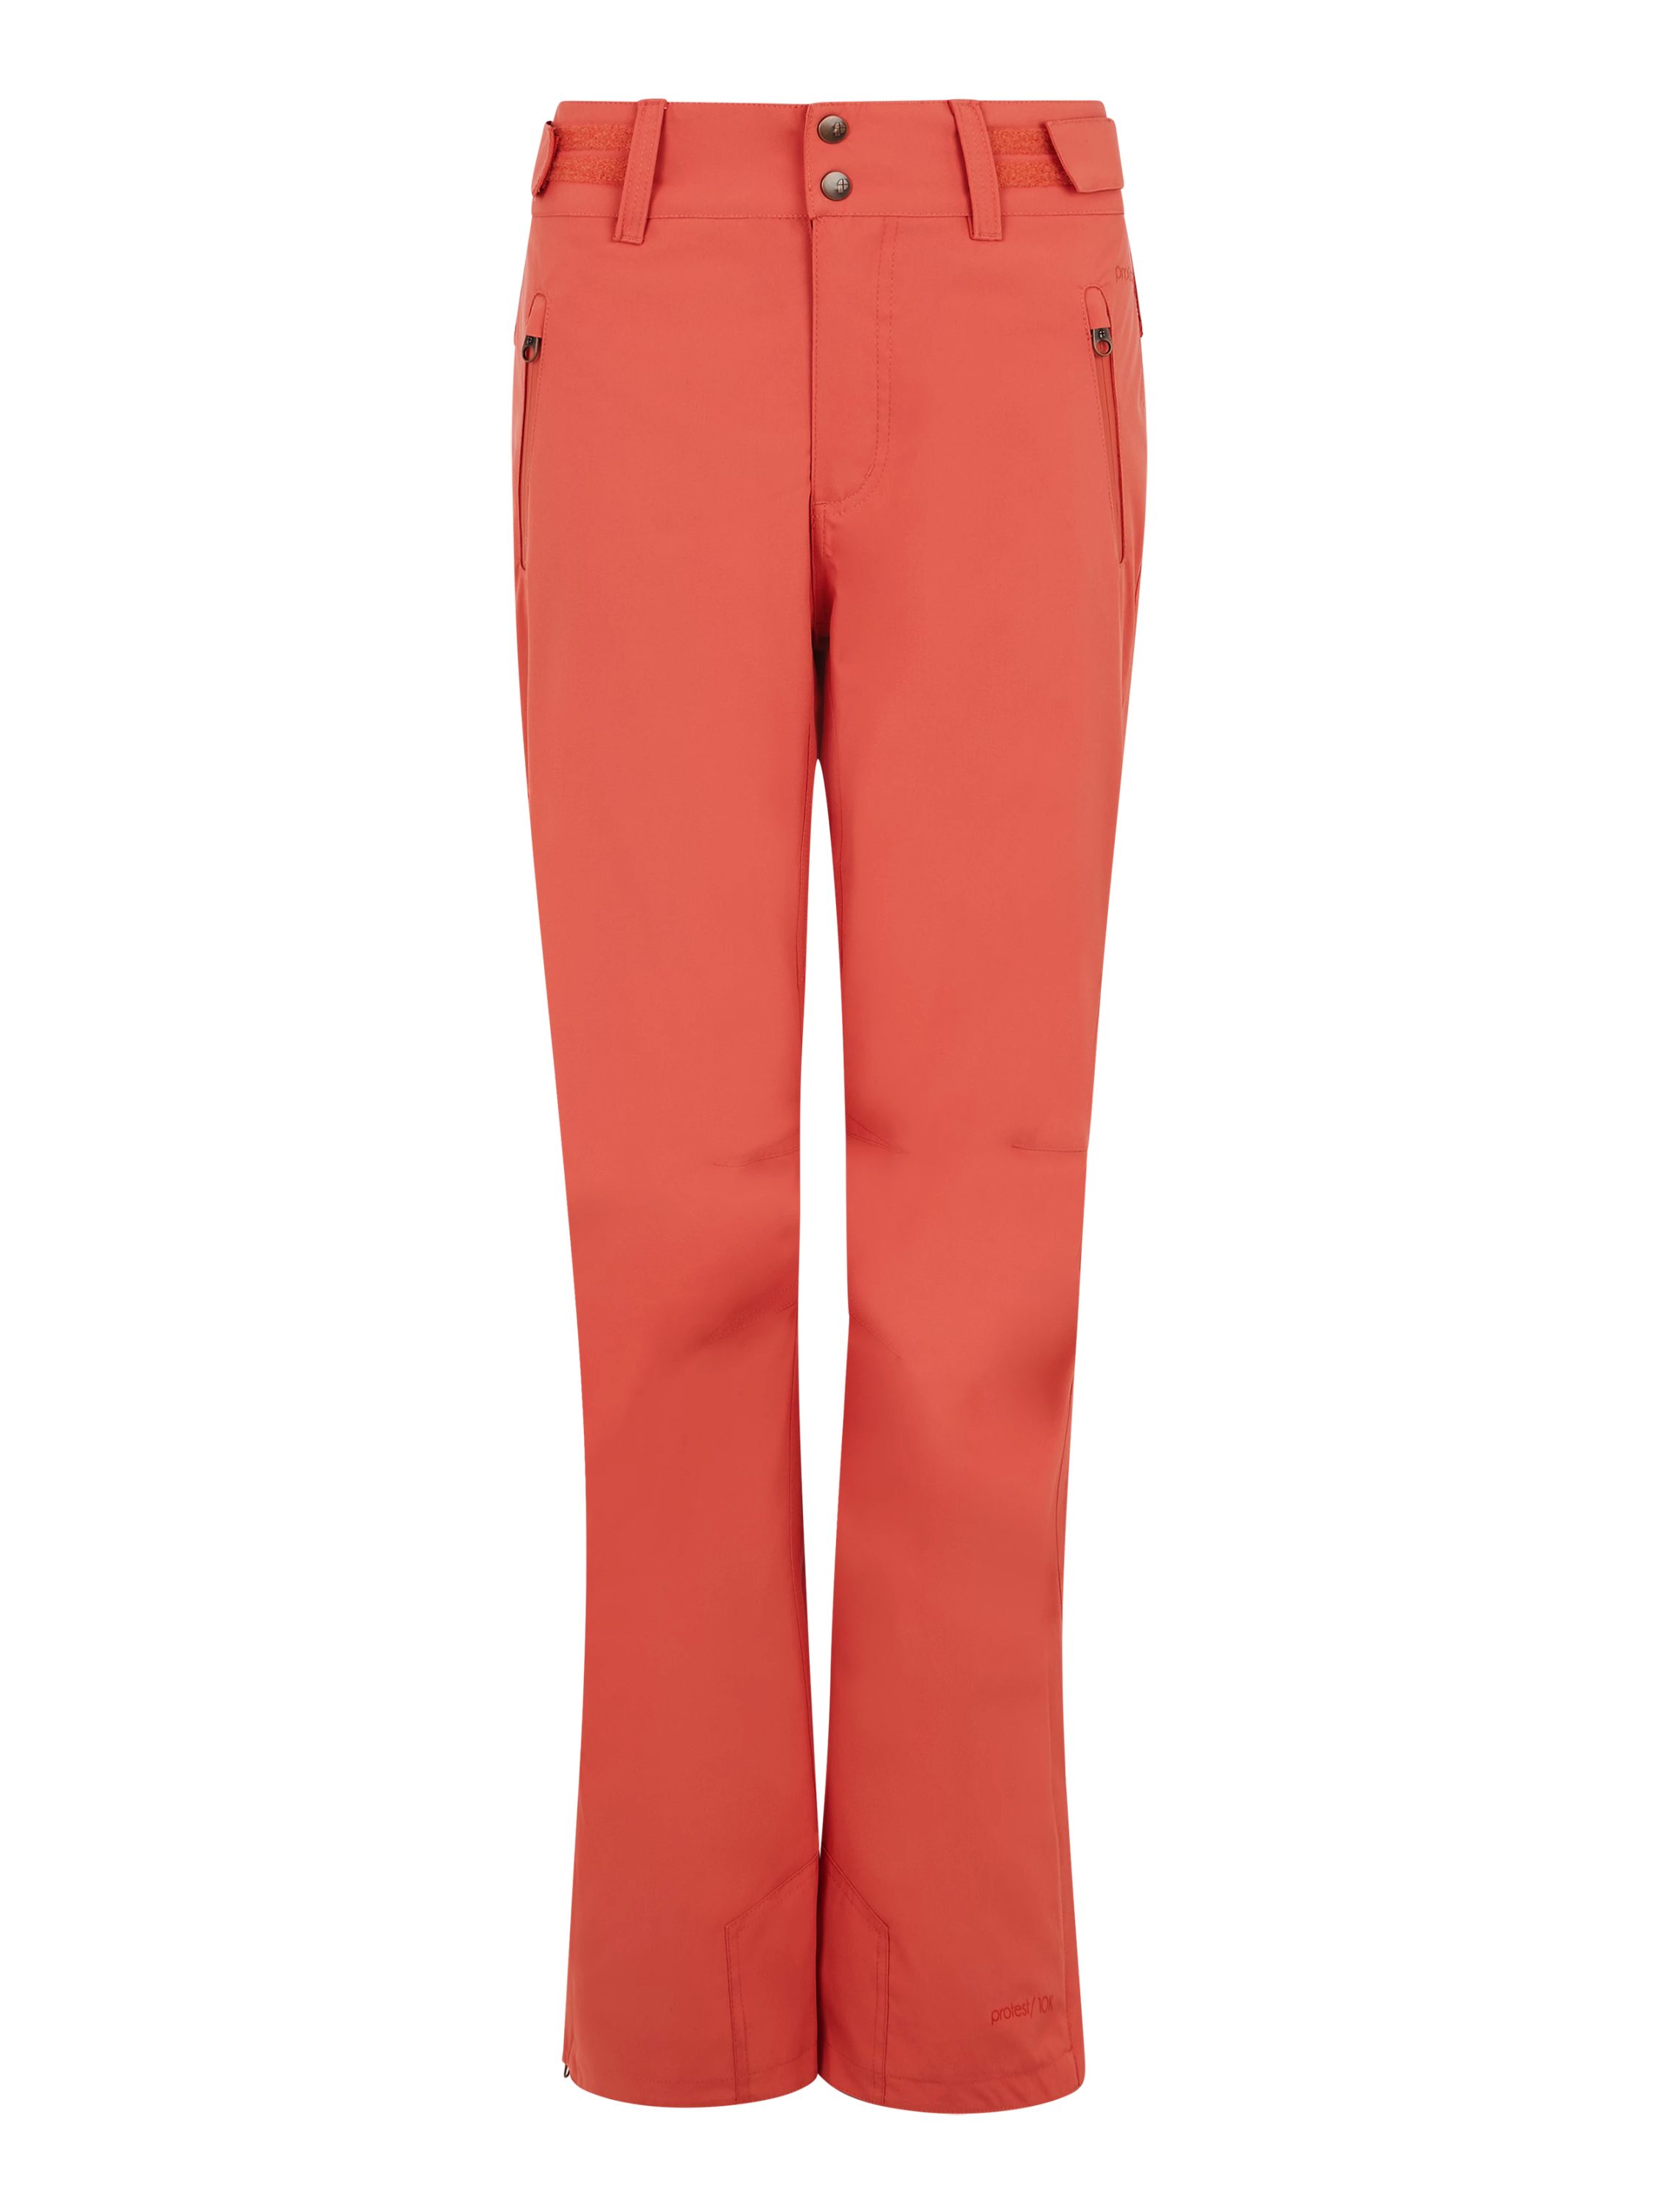 Red Protest CINNAMON Tosca snowpants Skihose